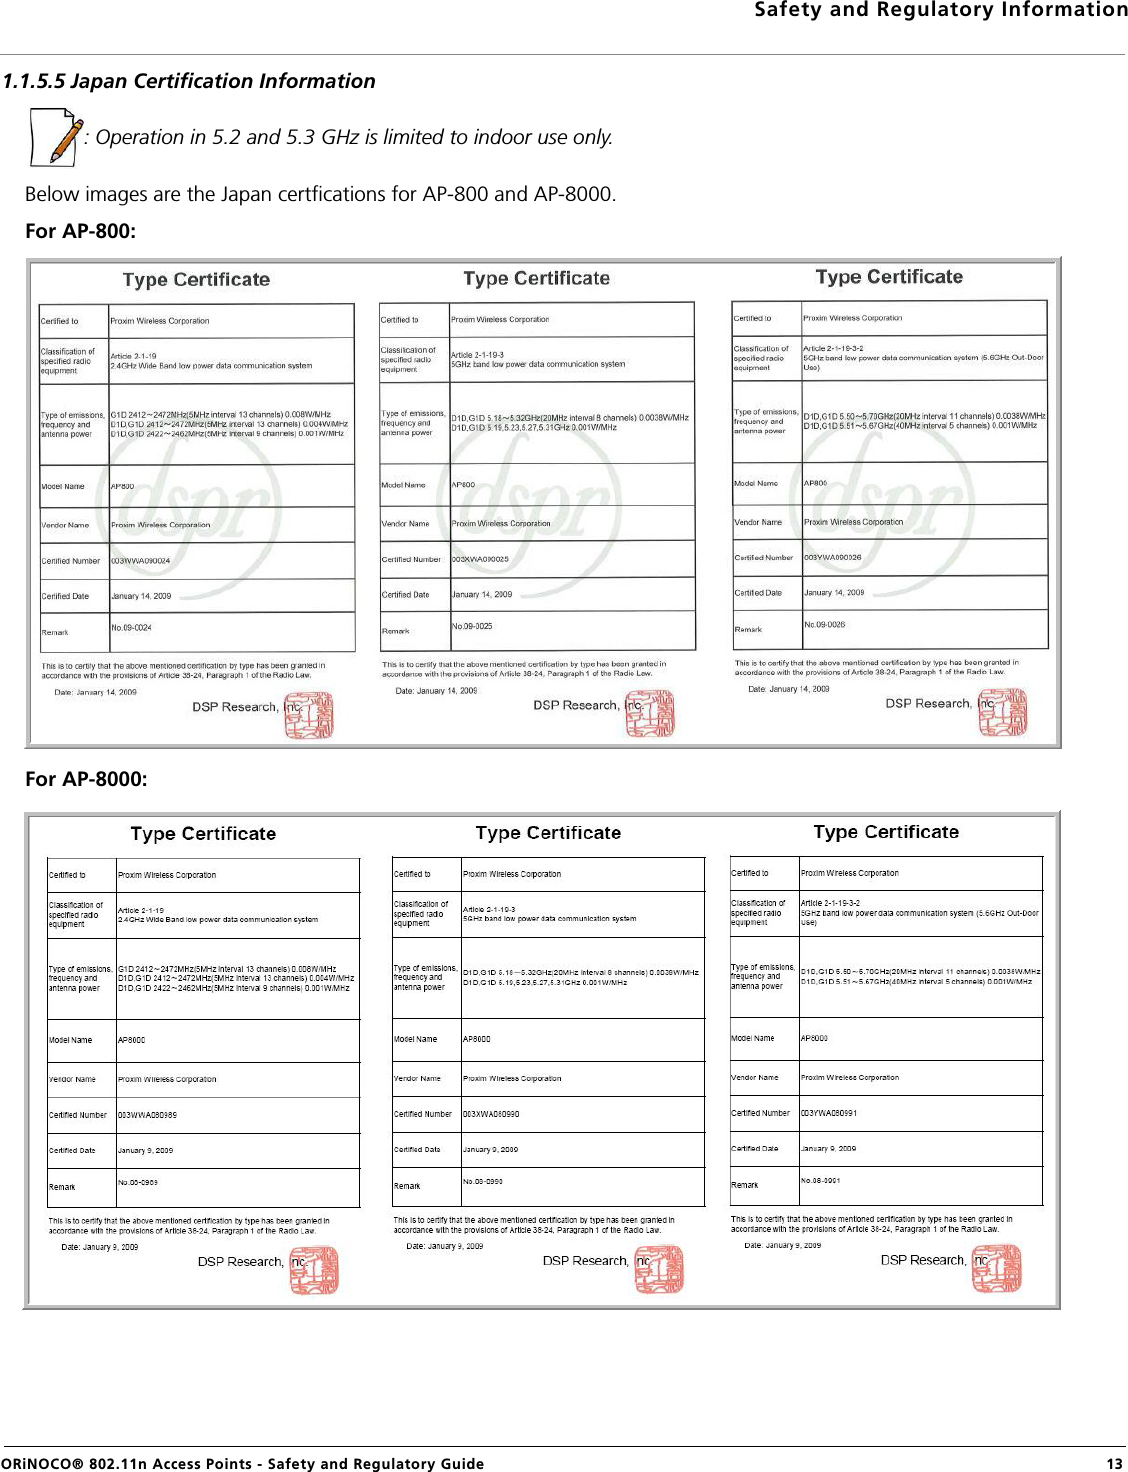 Safety and Regulatory InformationORiNOCO® 802.11n Access Points - Safety and Regulatory Guide  131.1.5.5 Japan Certification Information: Operation in 5.2 and 5.3 GHz is limited to indoor use only.Below images are the Japan certfications for AP-800 and AP-8000.For AP-800:For AP-8000: